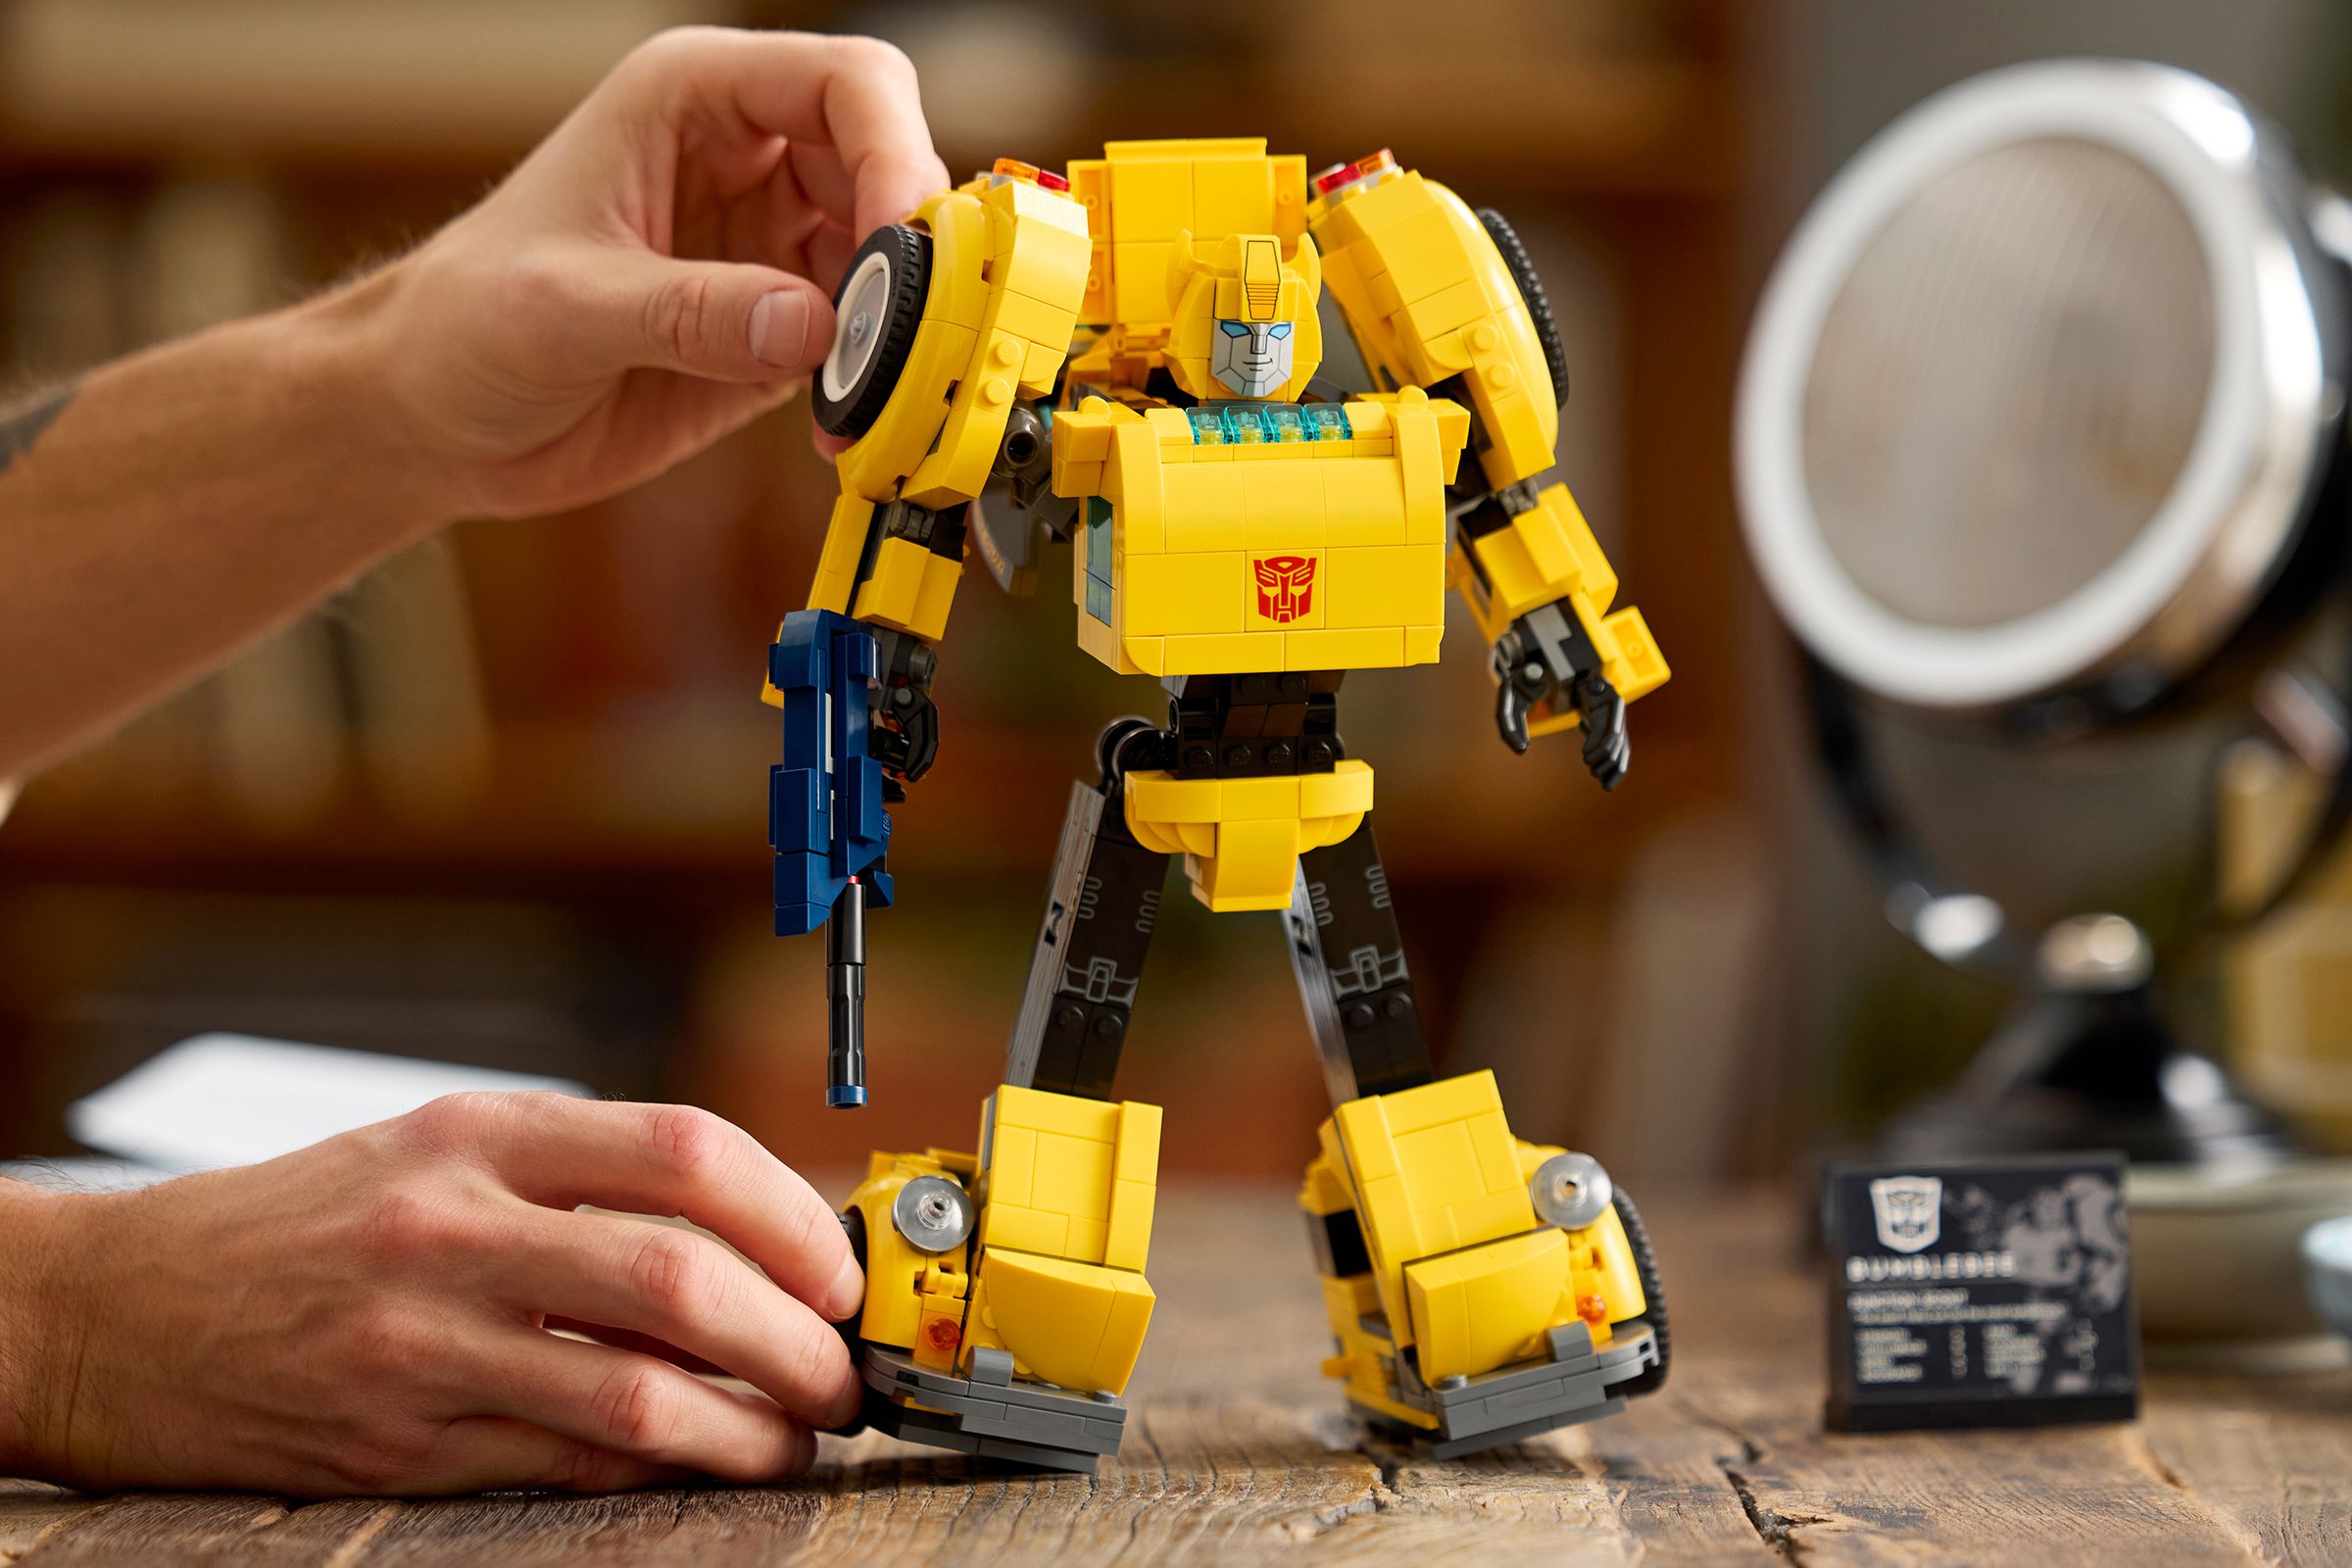 A person poses the Lego Transformers Bumblebee set in robot mode on a table.